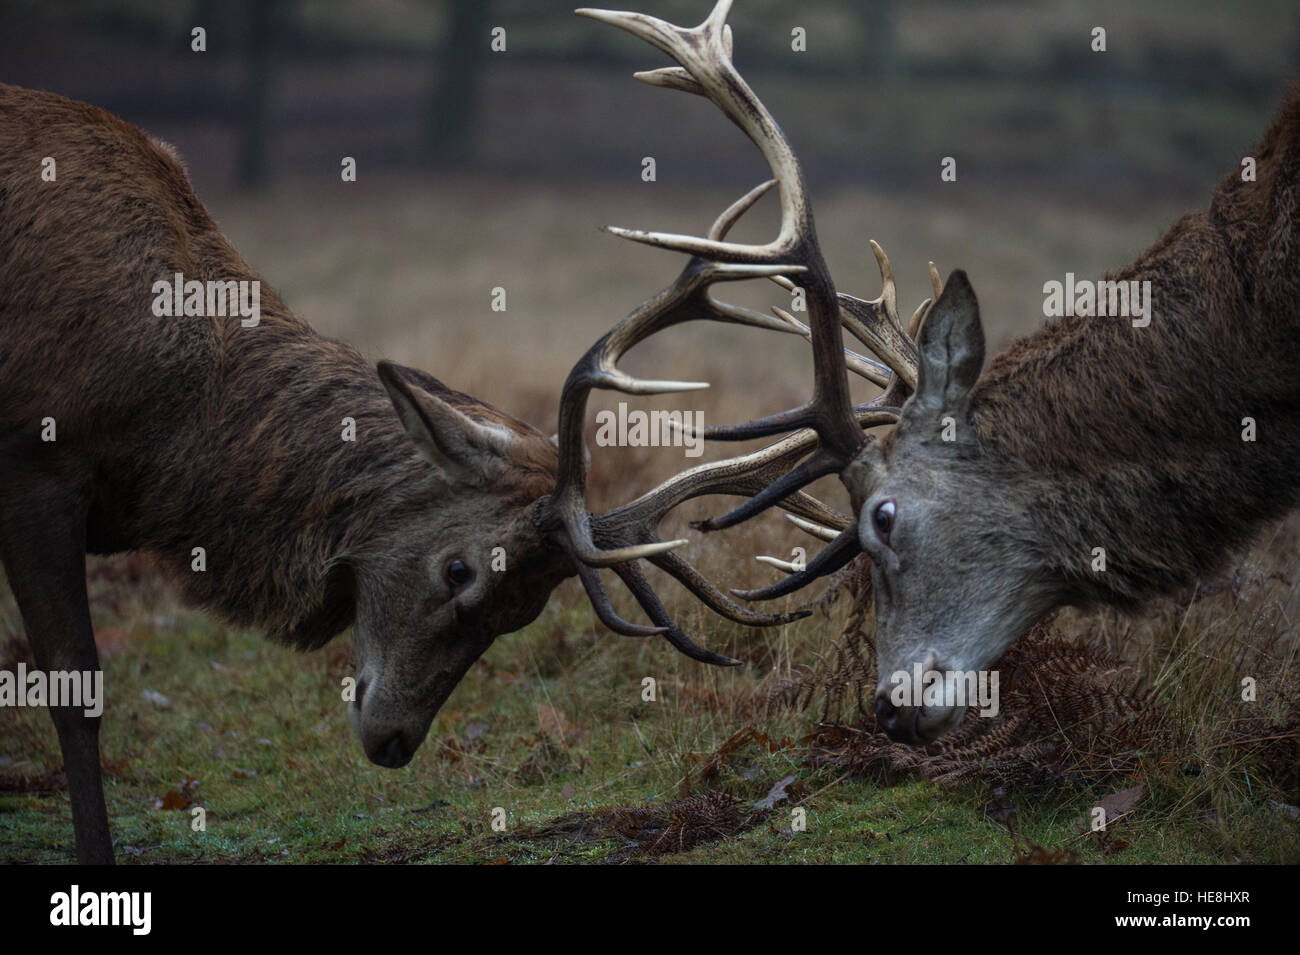 Red deer in Richmond park, London, England Stock Photo